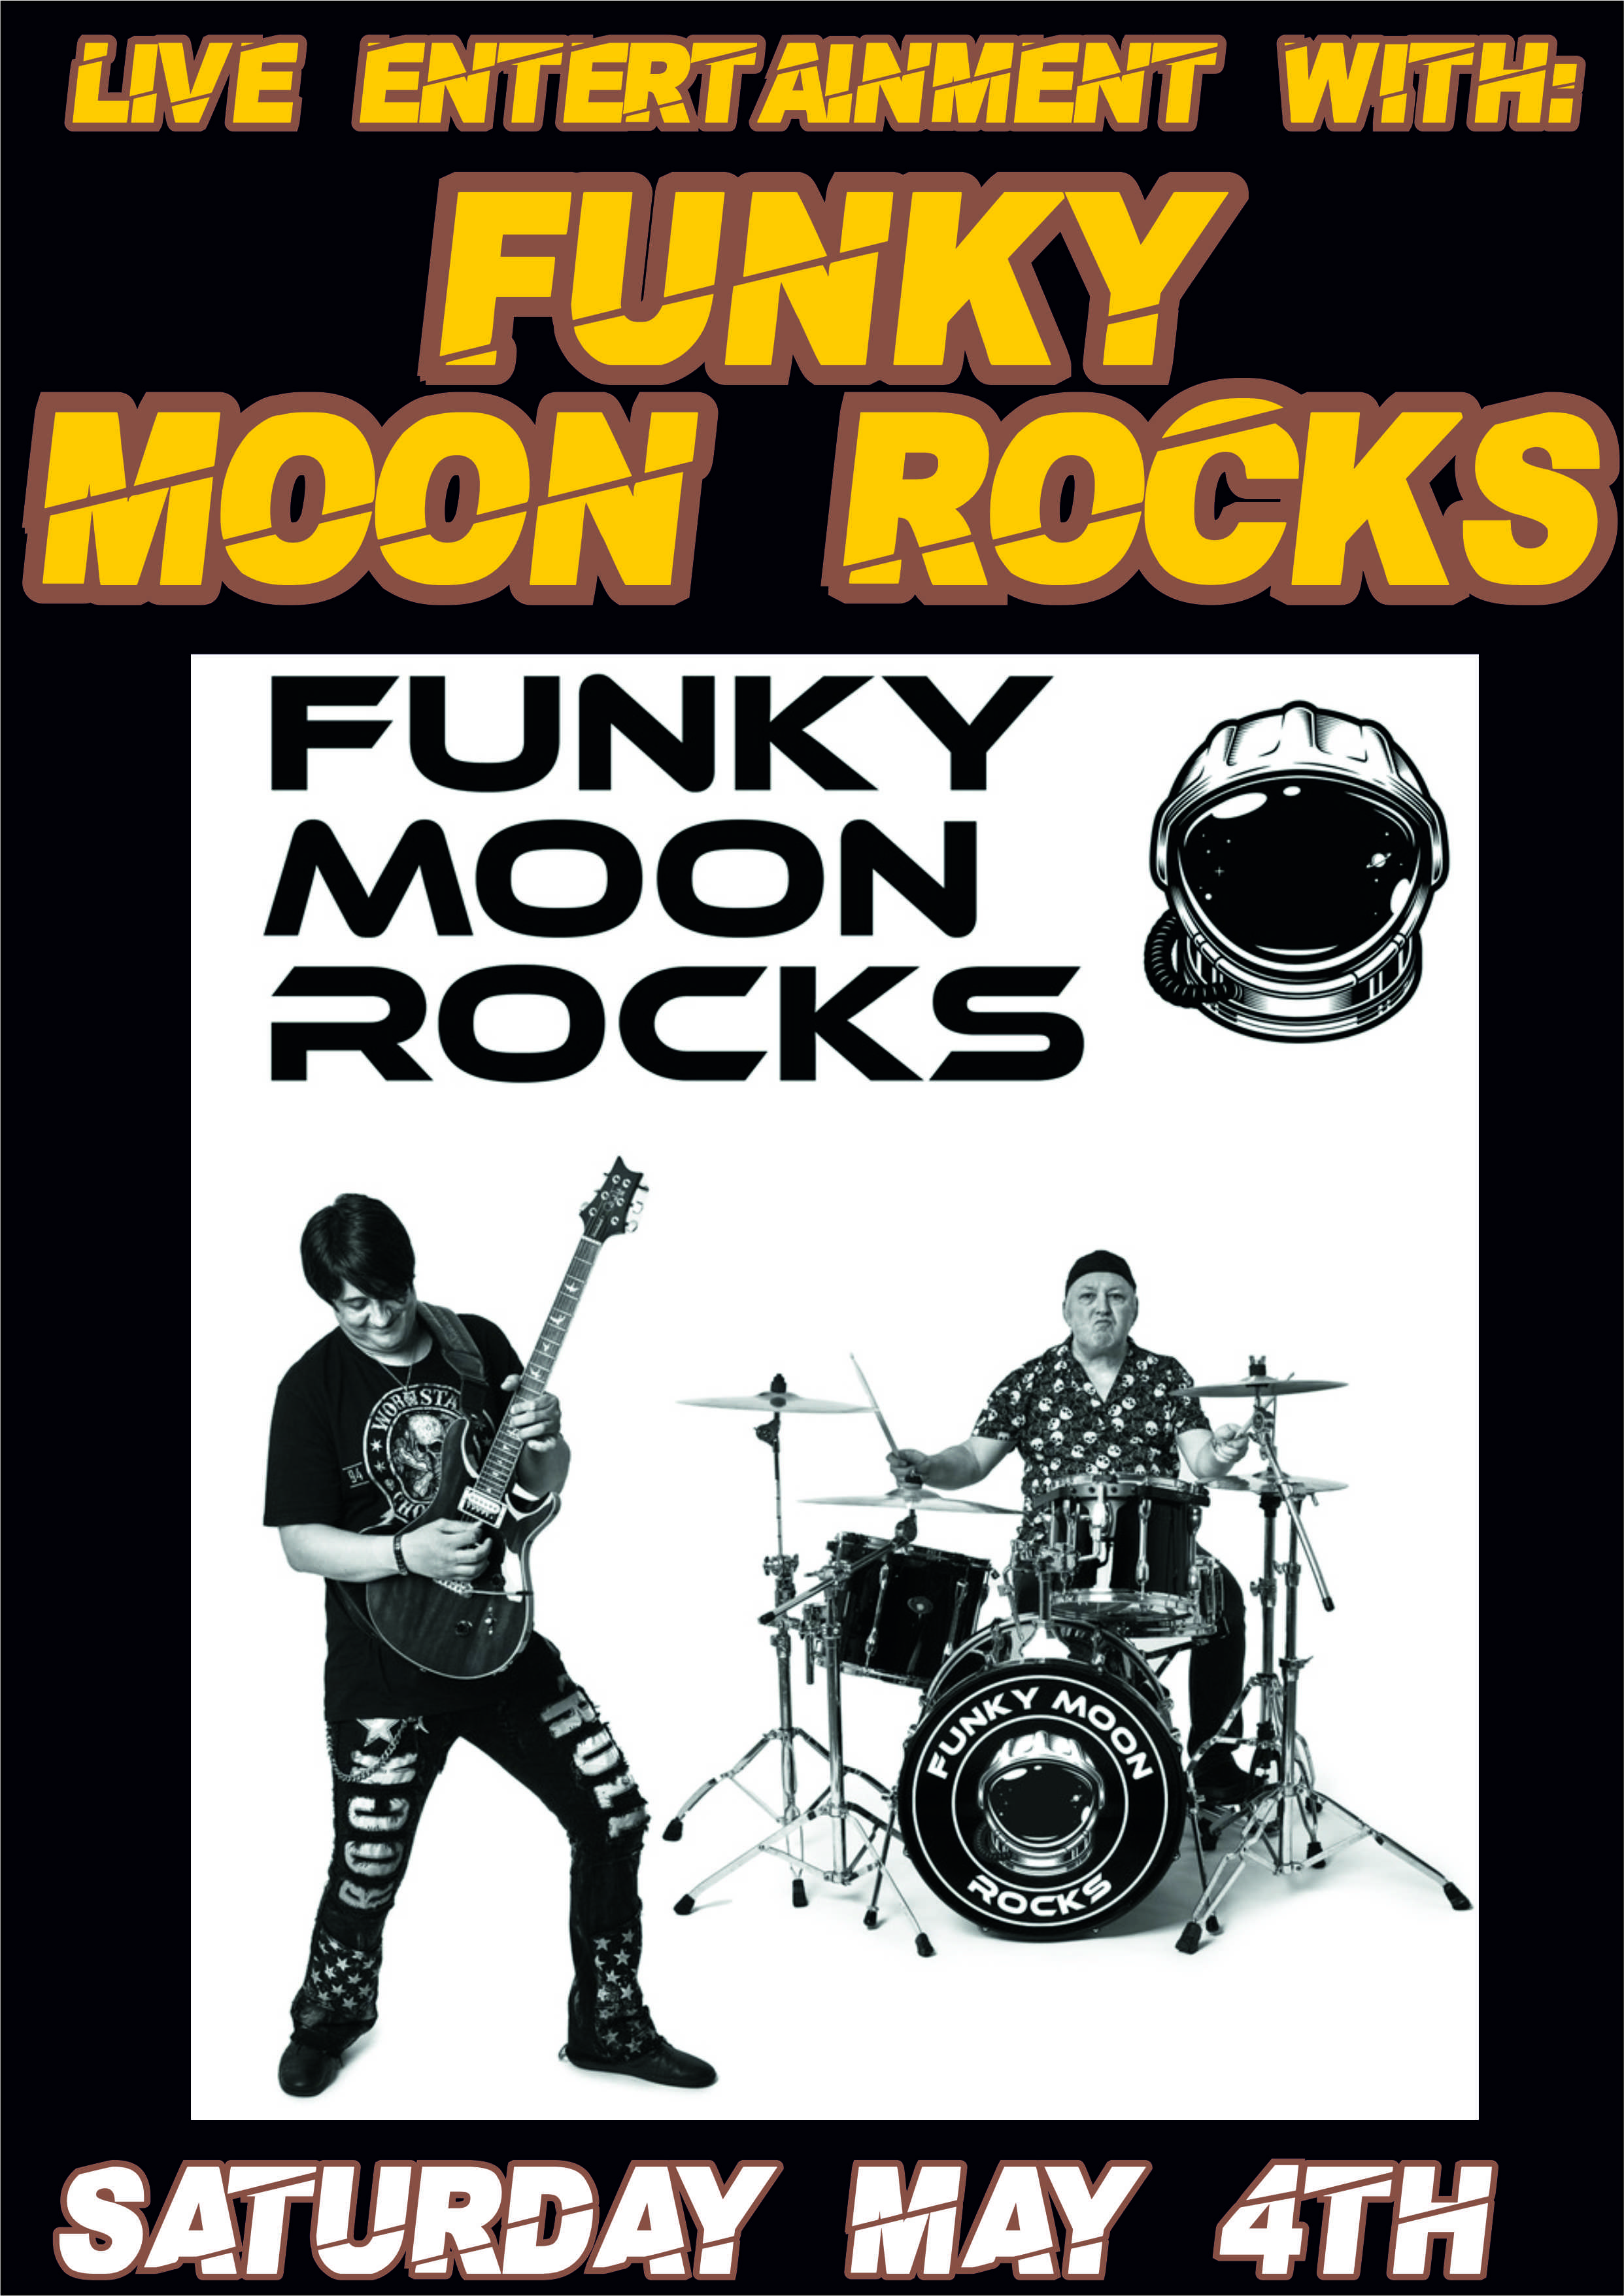 Live Entertainment with Funky Moon Rocks